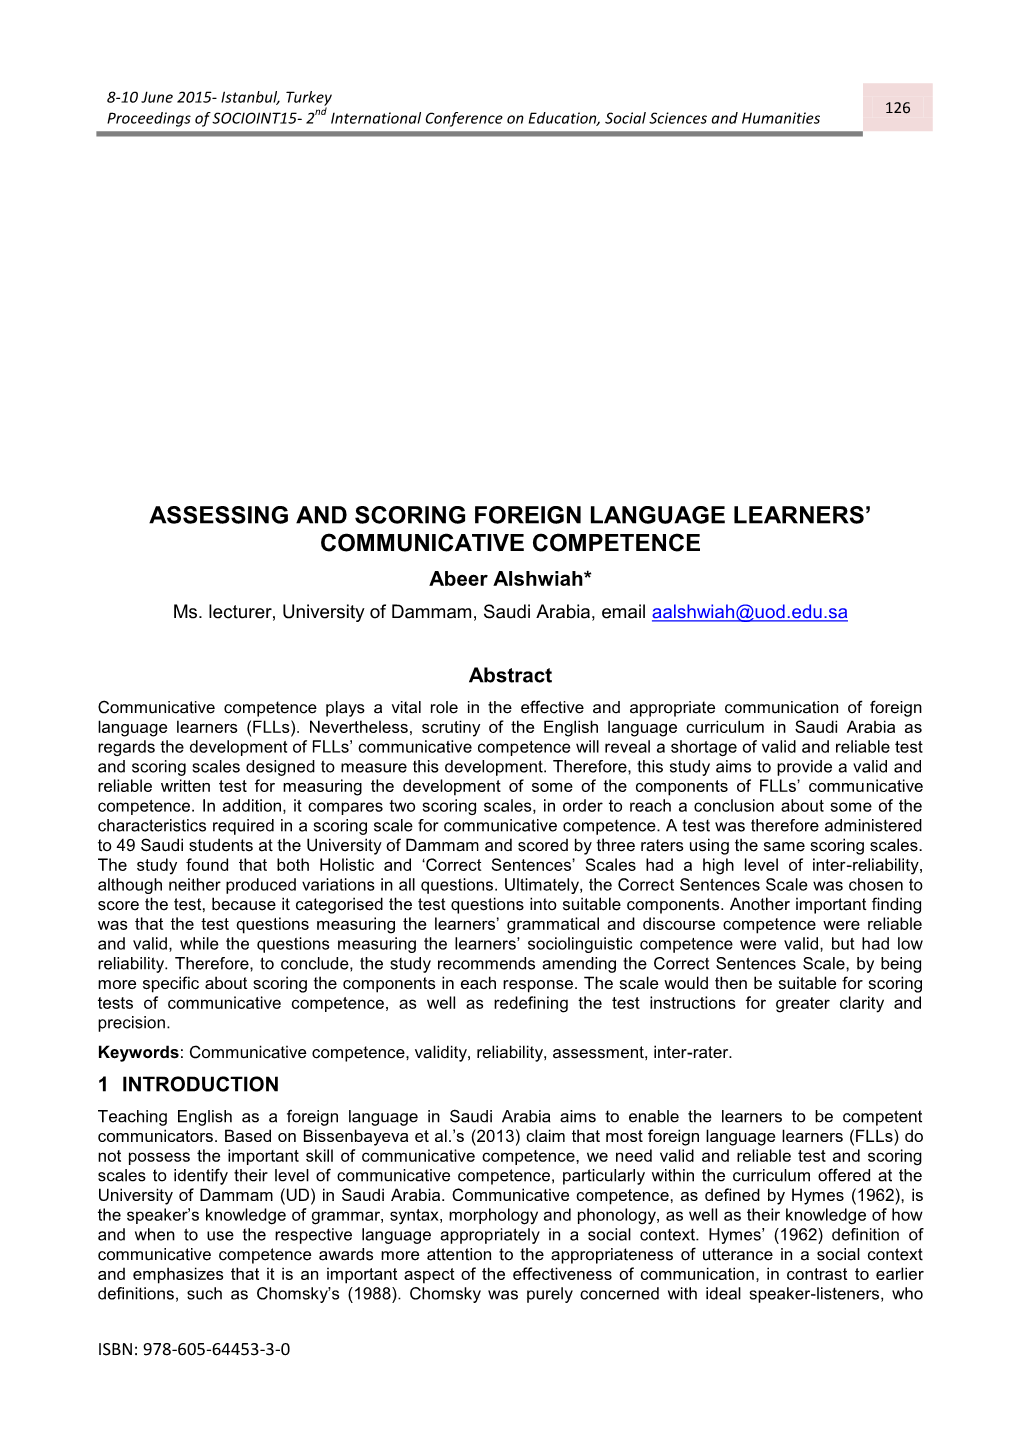 ASSESSING and SCORING FOREIGN LANGUAGE LEARNERS’ COMMUNICATIVE COMPETENCE Abeer Alshwiah* Ms